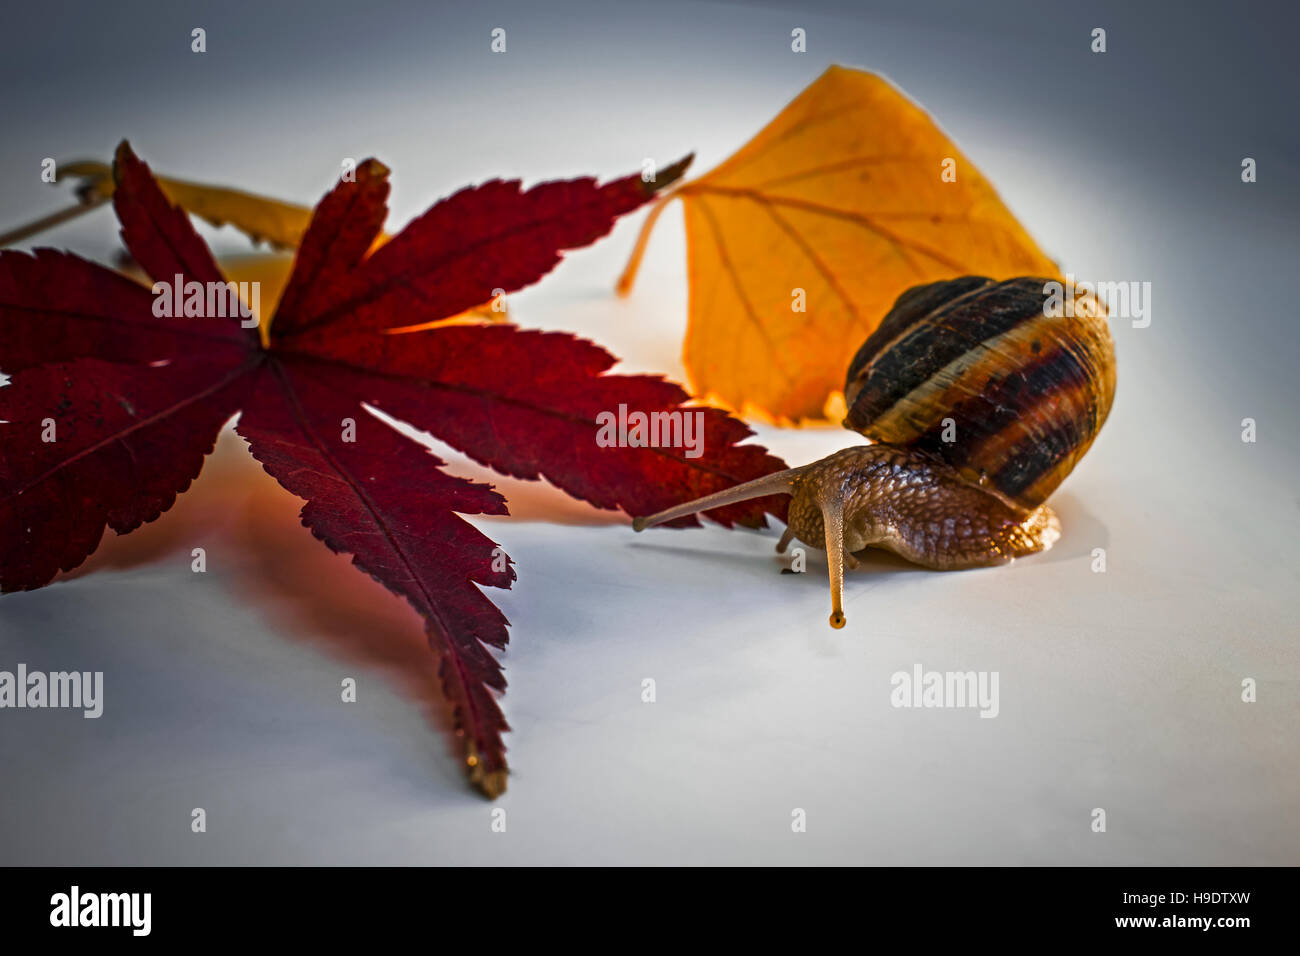 Snail with Leaf of Japanese Maple and Other Leaves Stock Photo